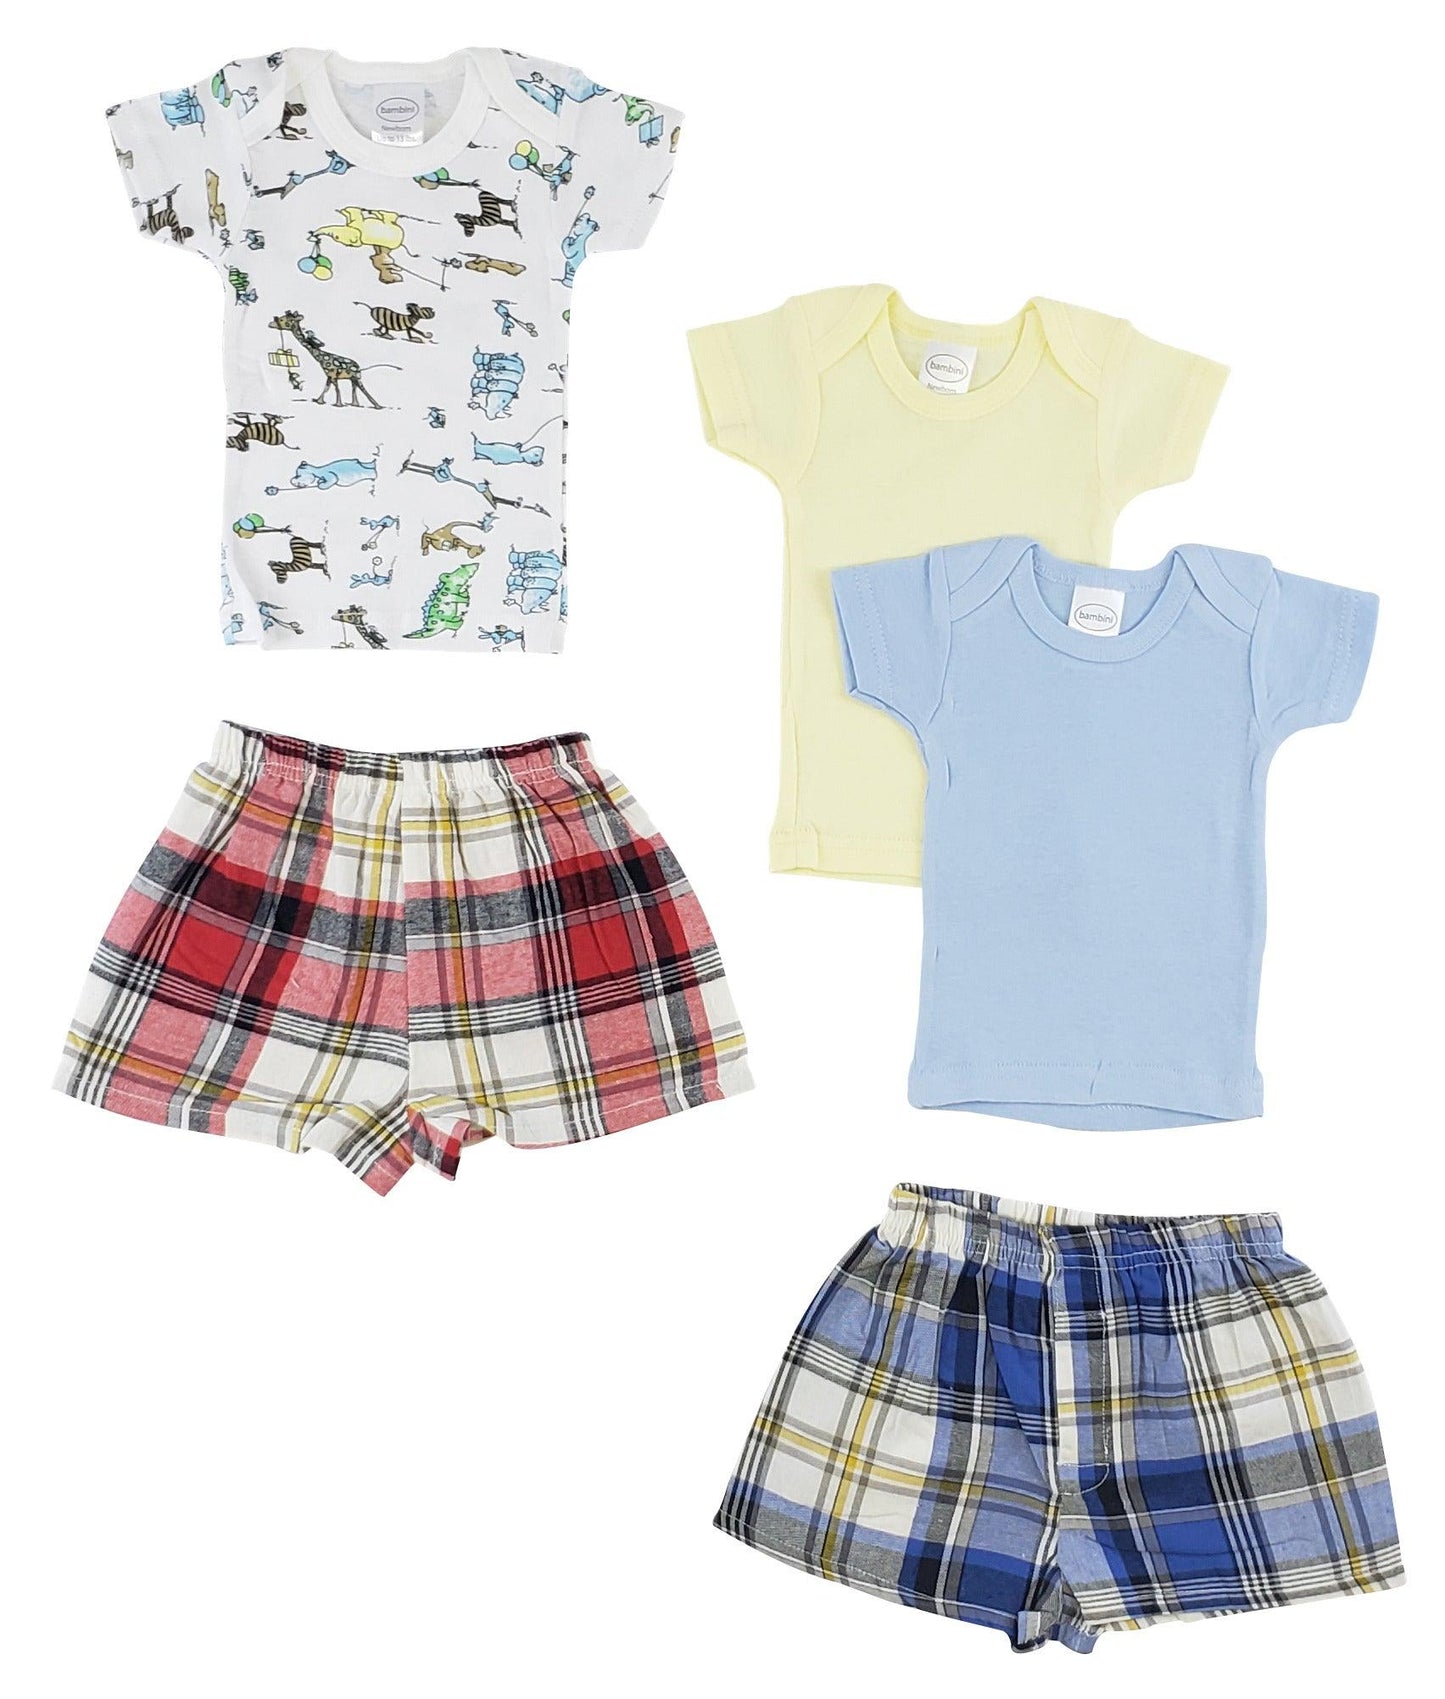 Infant Girls T-shirts And Boxer Shorts - Loomini